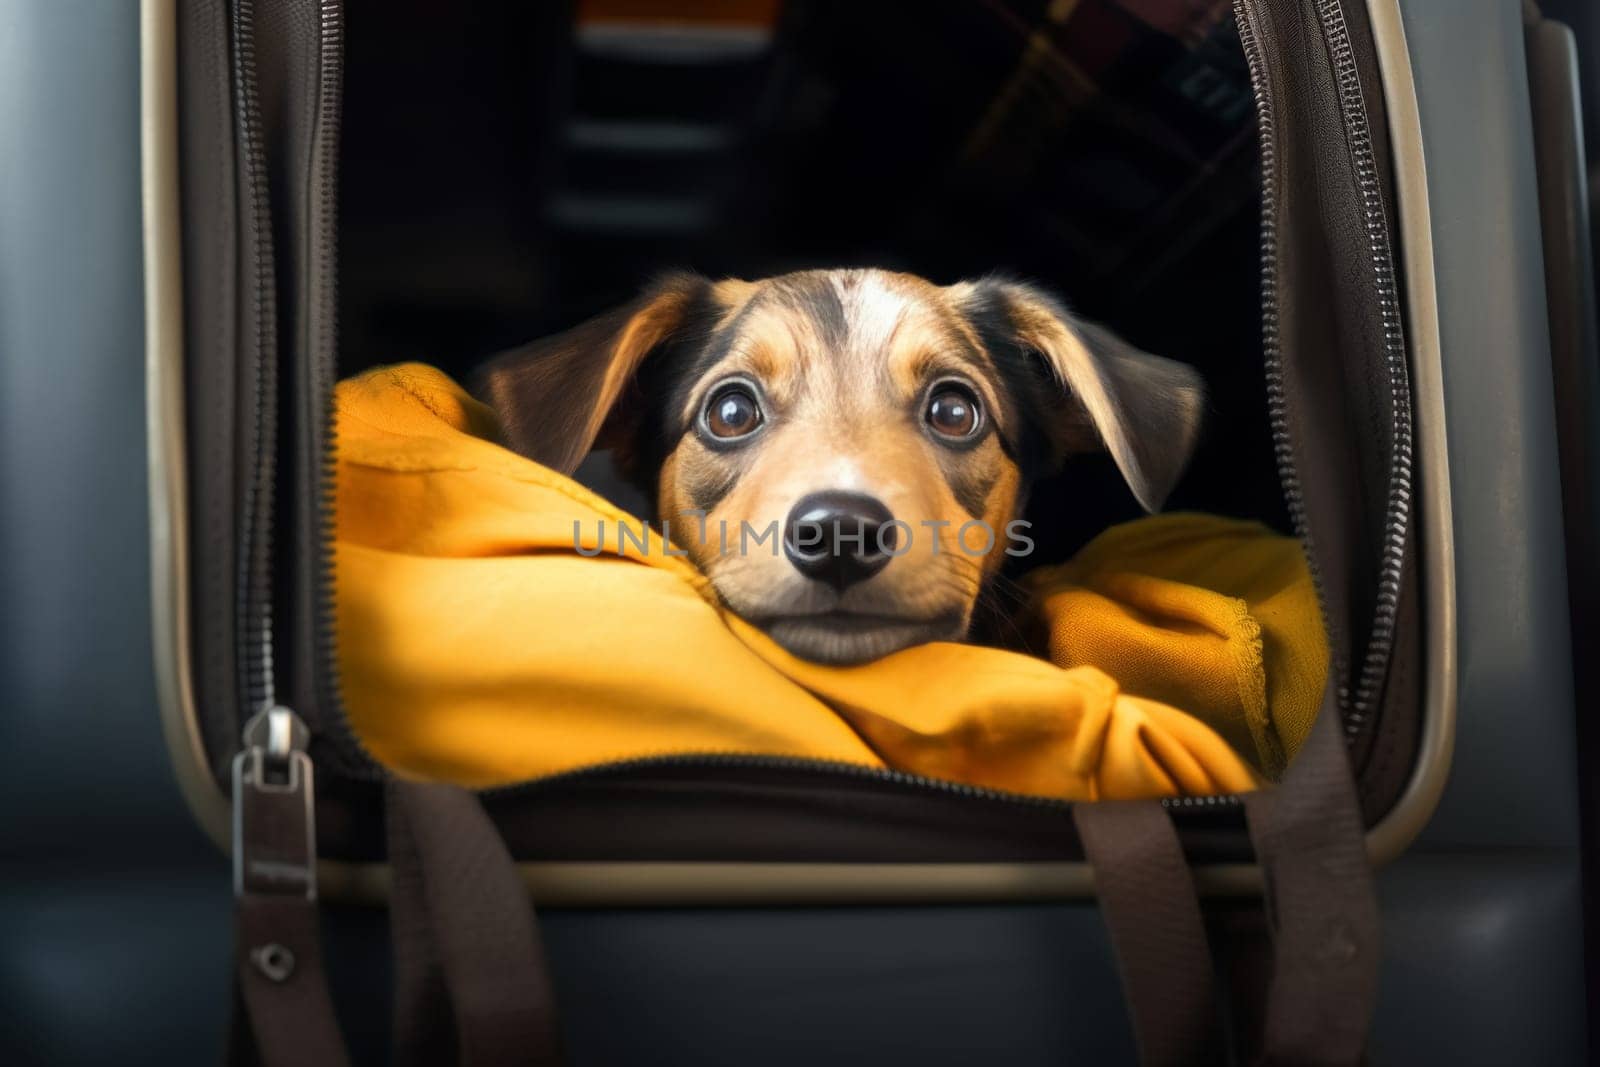 A brown and white dog with soulful eyes peeking out from a yellow travel bag, capturing a moment of travel or adventure with a pet